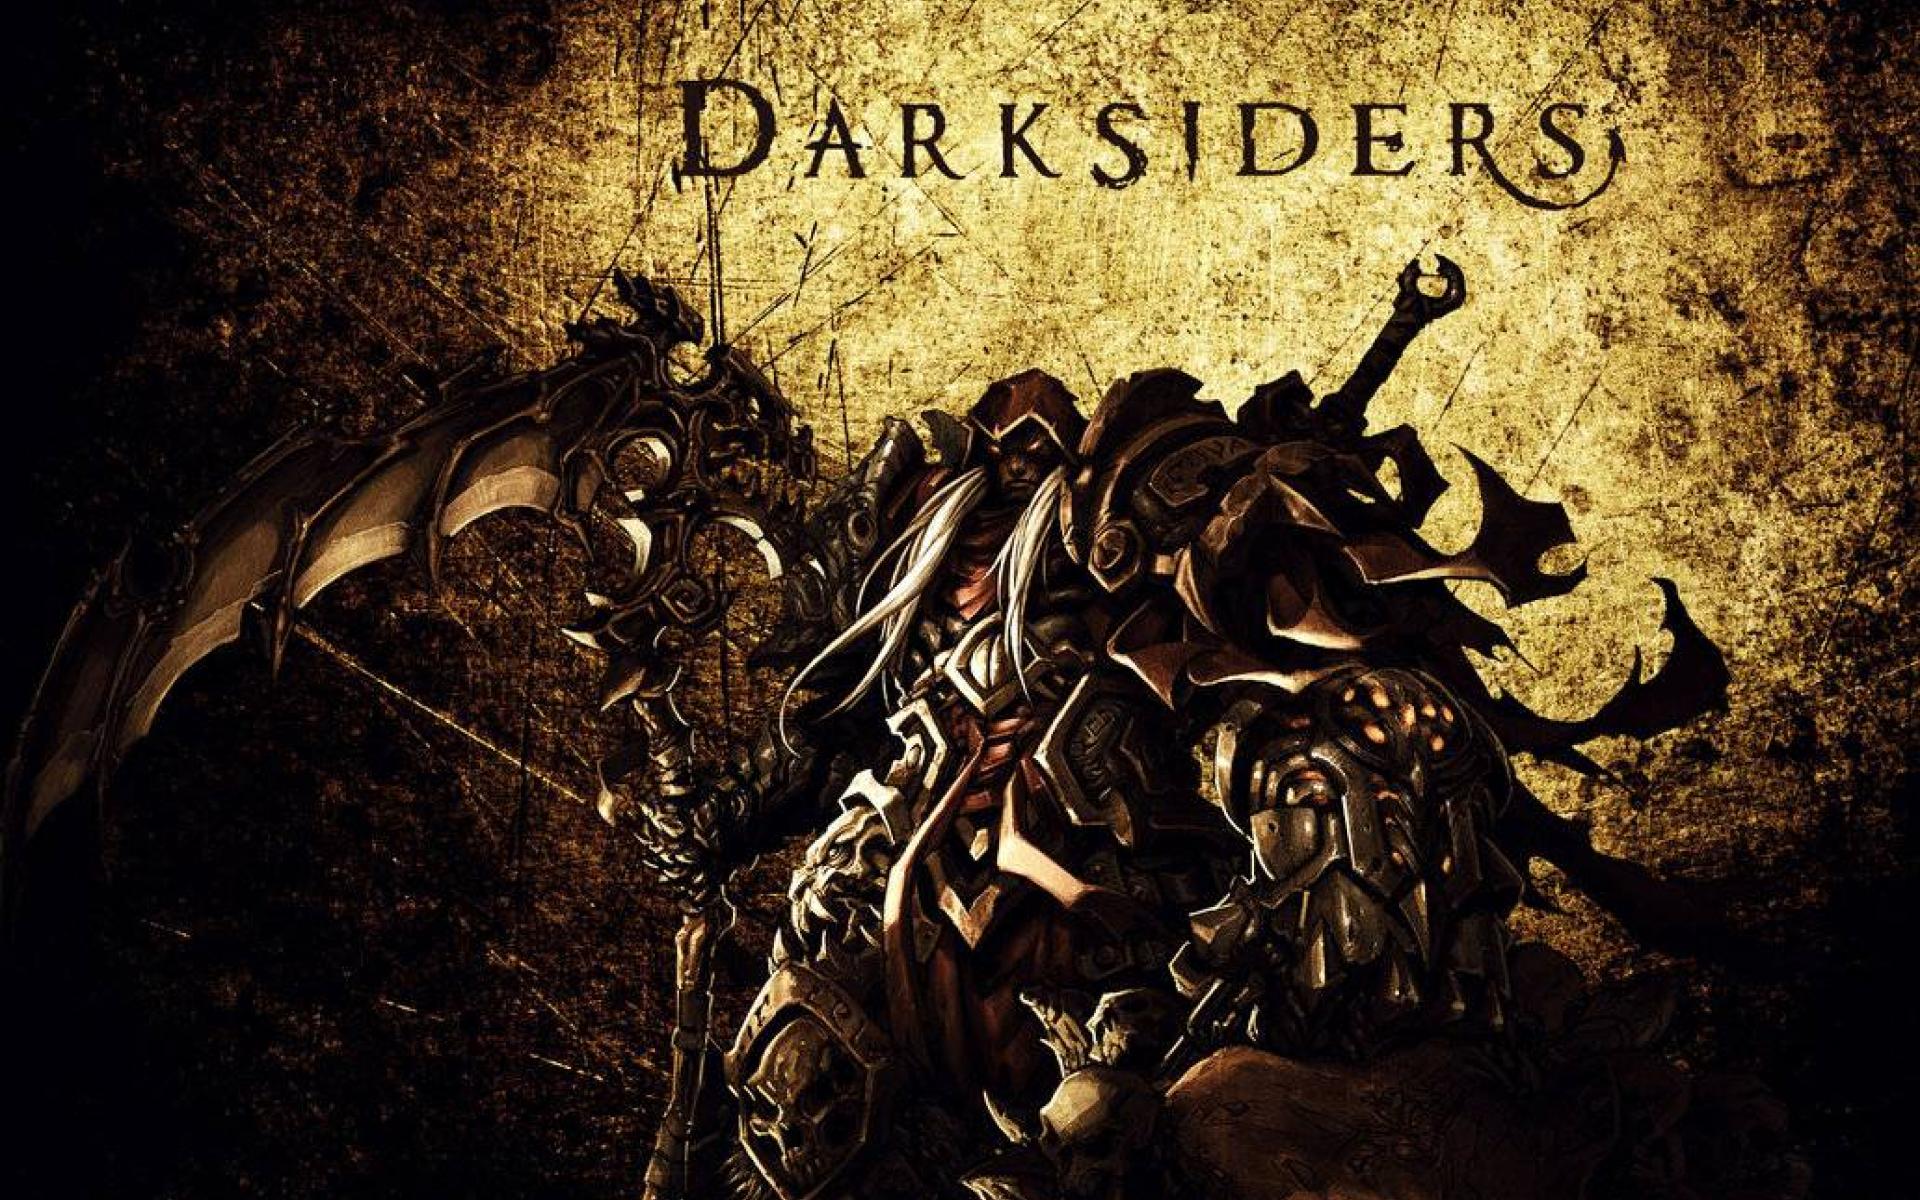 Darksiders your last days by romengfx wallpaper - (#5910) - High ...